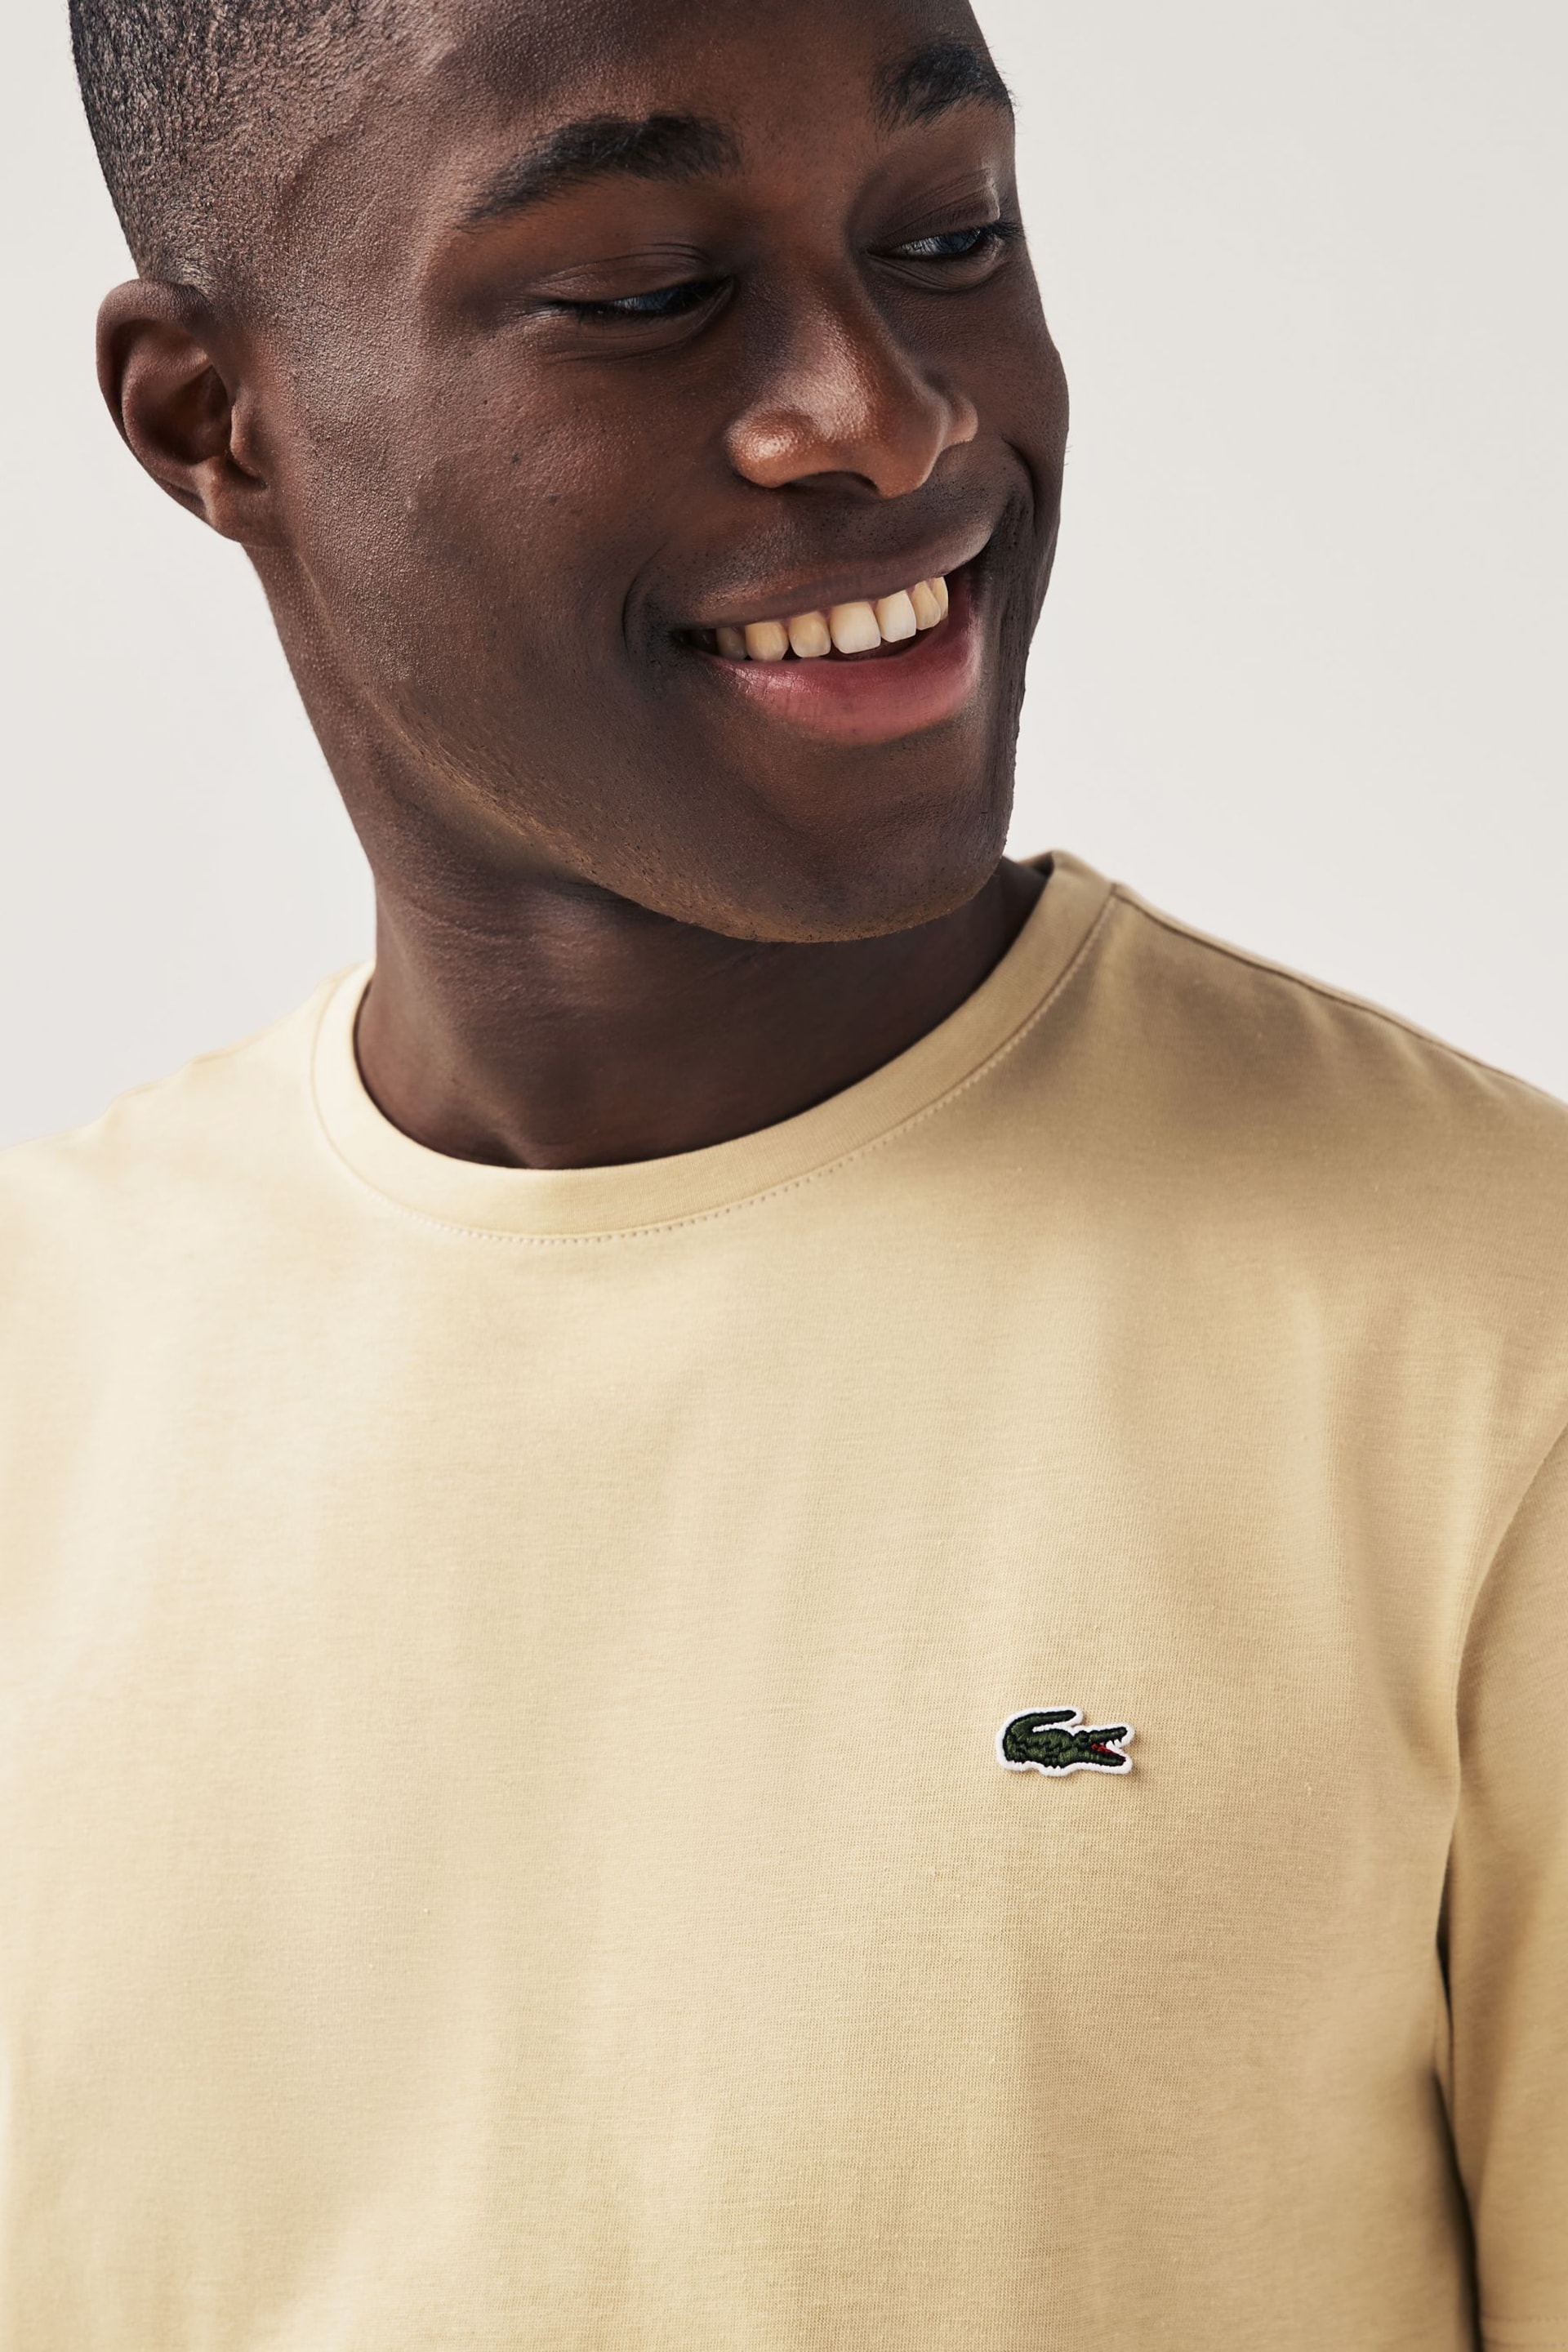 Lacoste Sports Regular Fit Cotton T-Shirt - Image 3 of 4